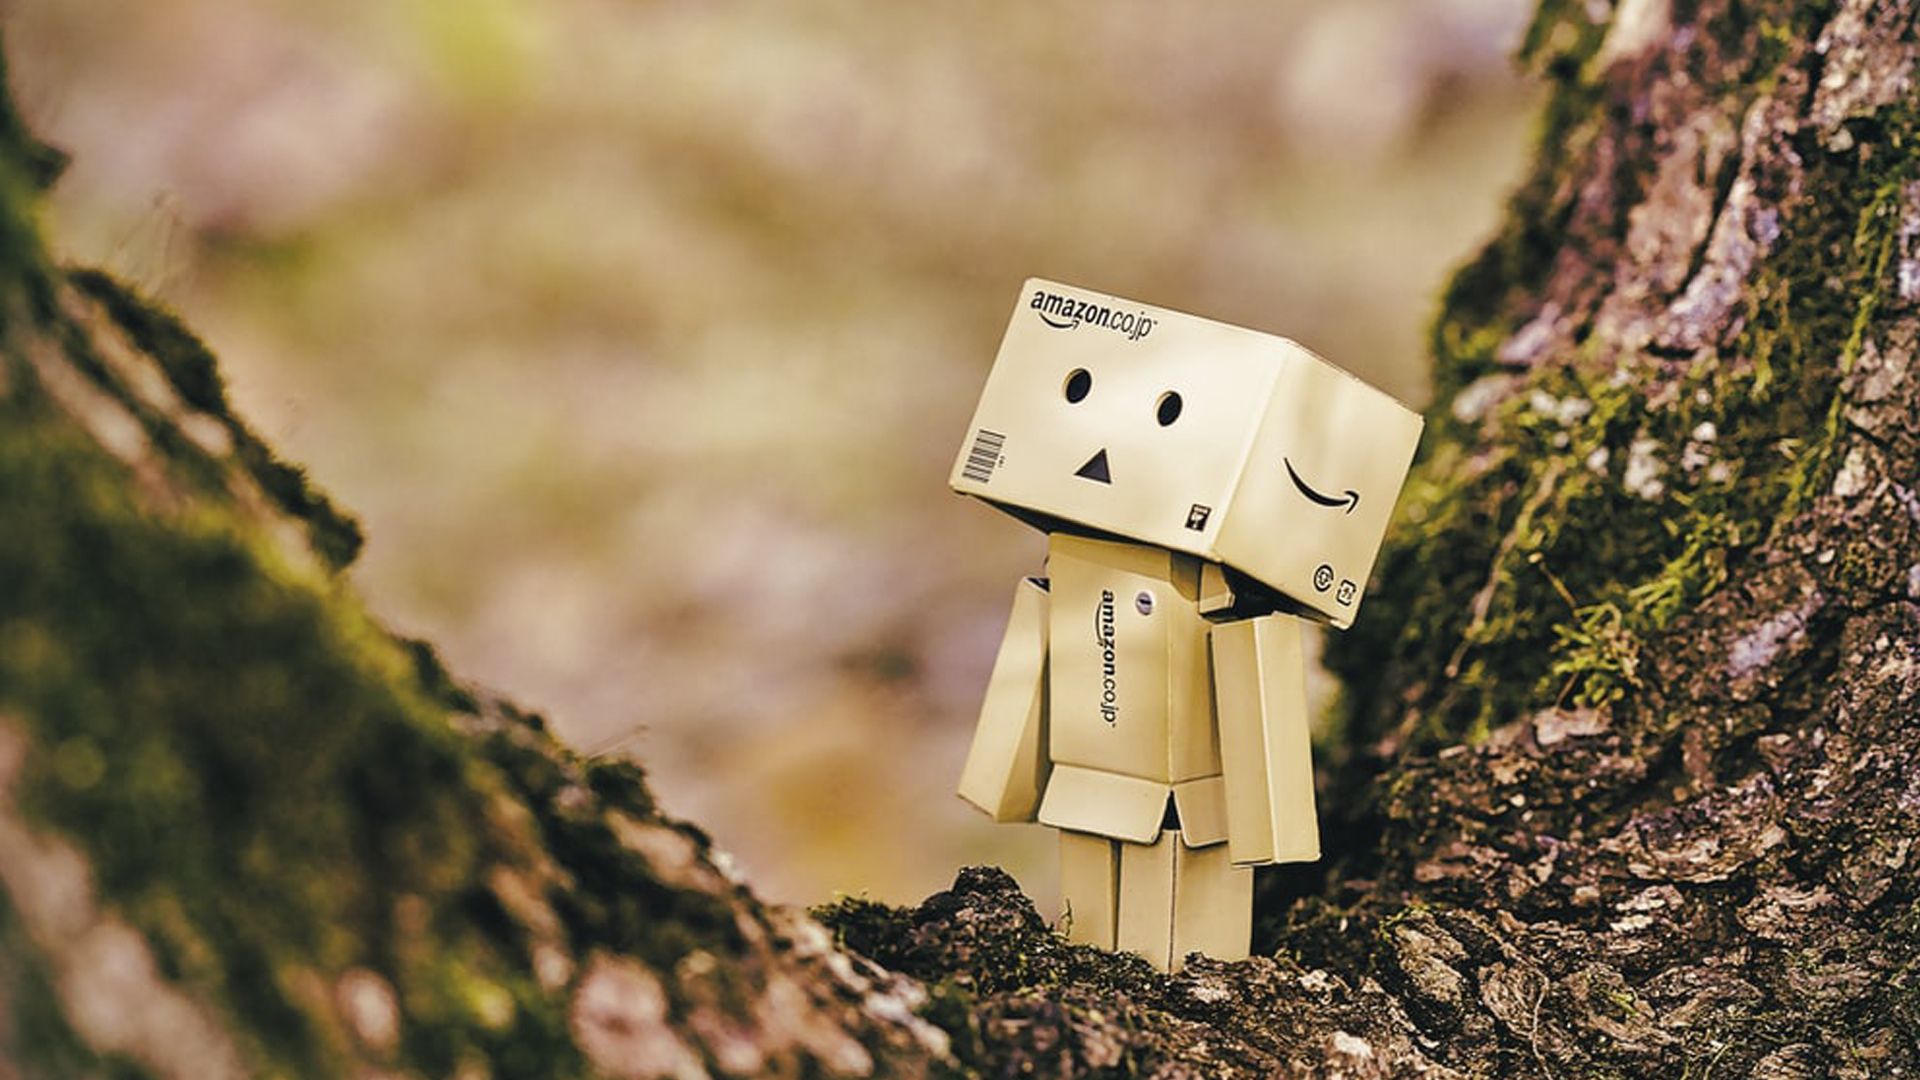 n Amazon-themed Action Figure with Box-Shaped Parts, Round Eyes, and a Triangular Mouth Looking up While Standing on a Tree